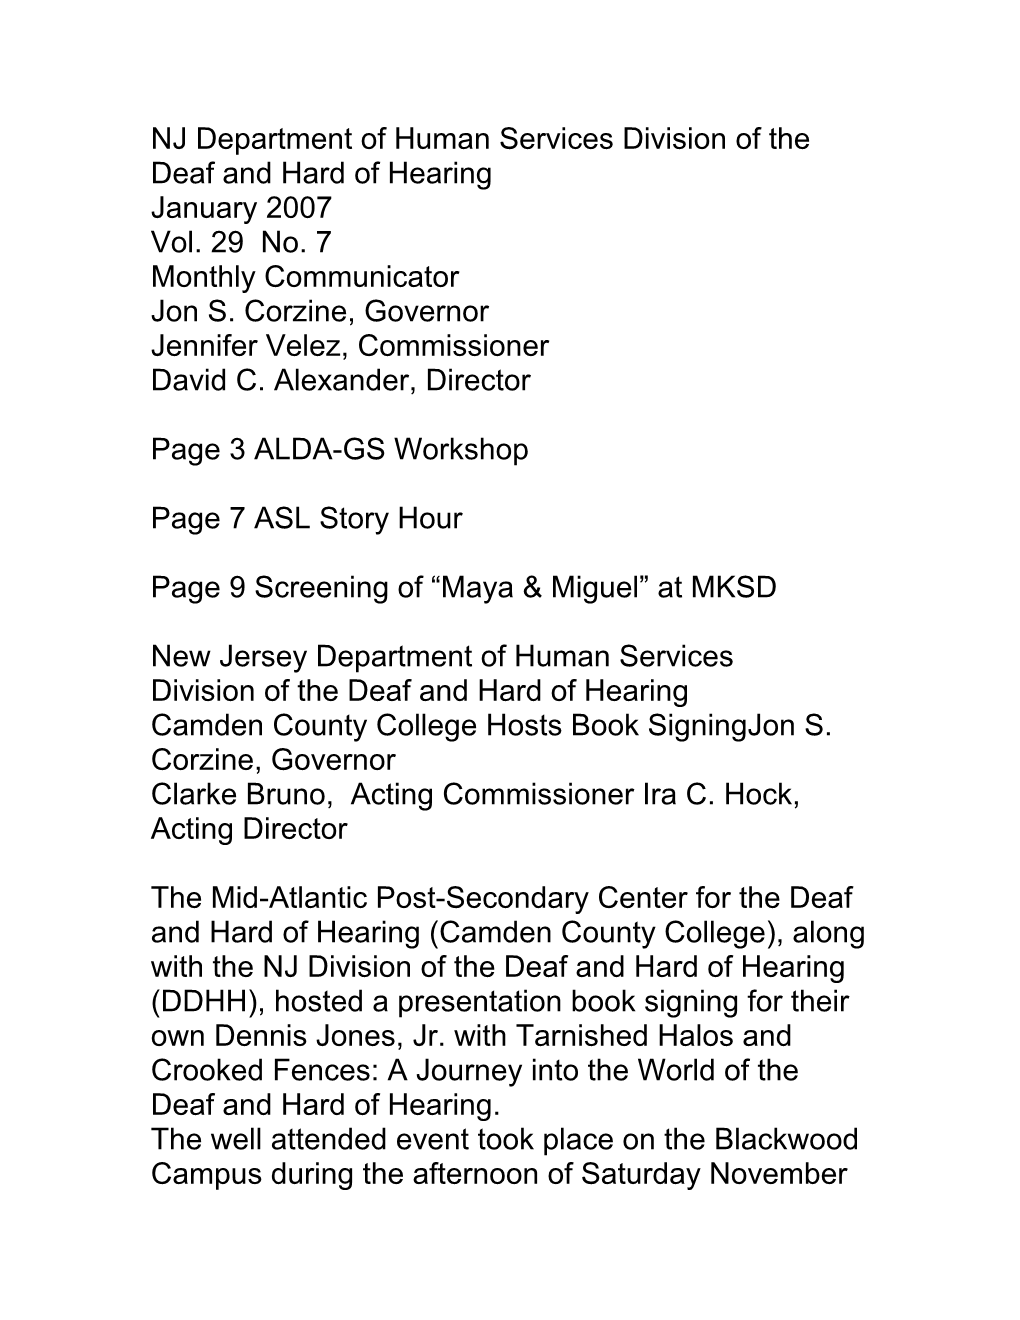 NJ Department of Human Services Division of the Deaf and Hard of Hearing